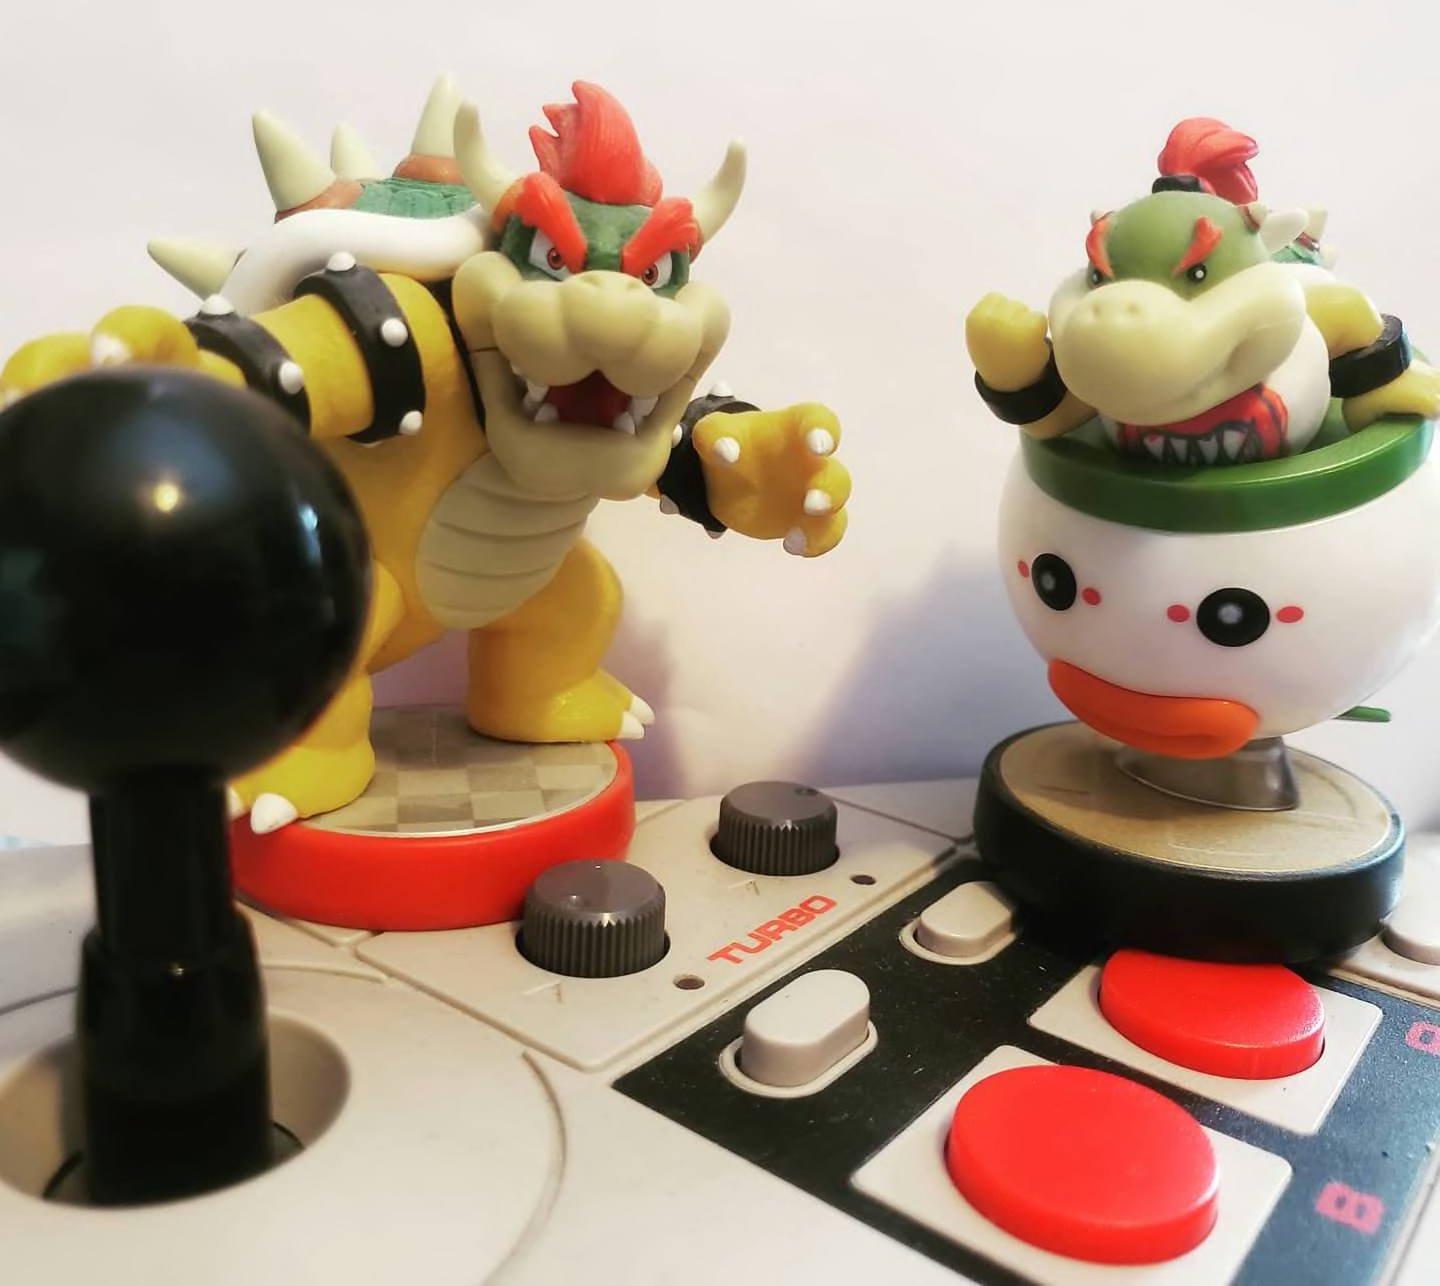 Super Mario 3d World Bowser S Fury Amiibo Guide For Special Effects